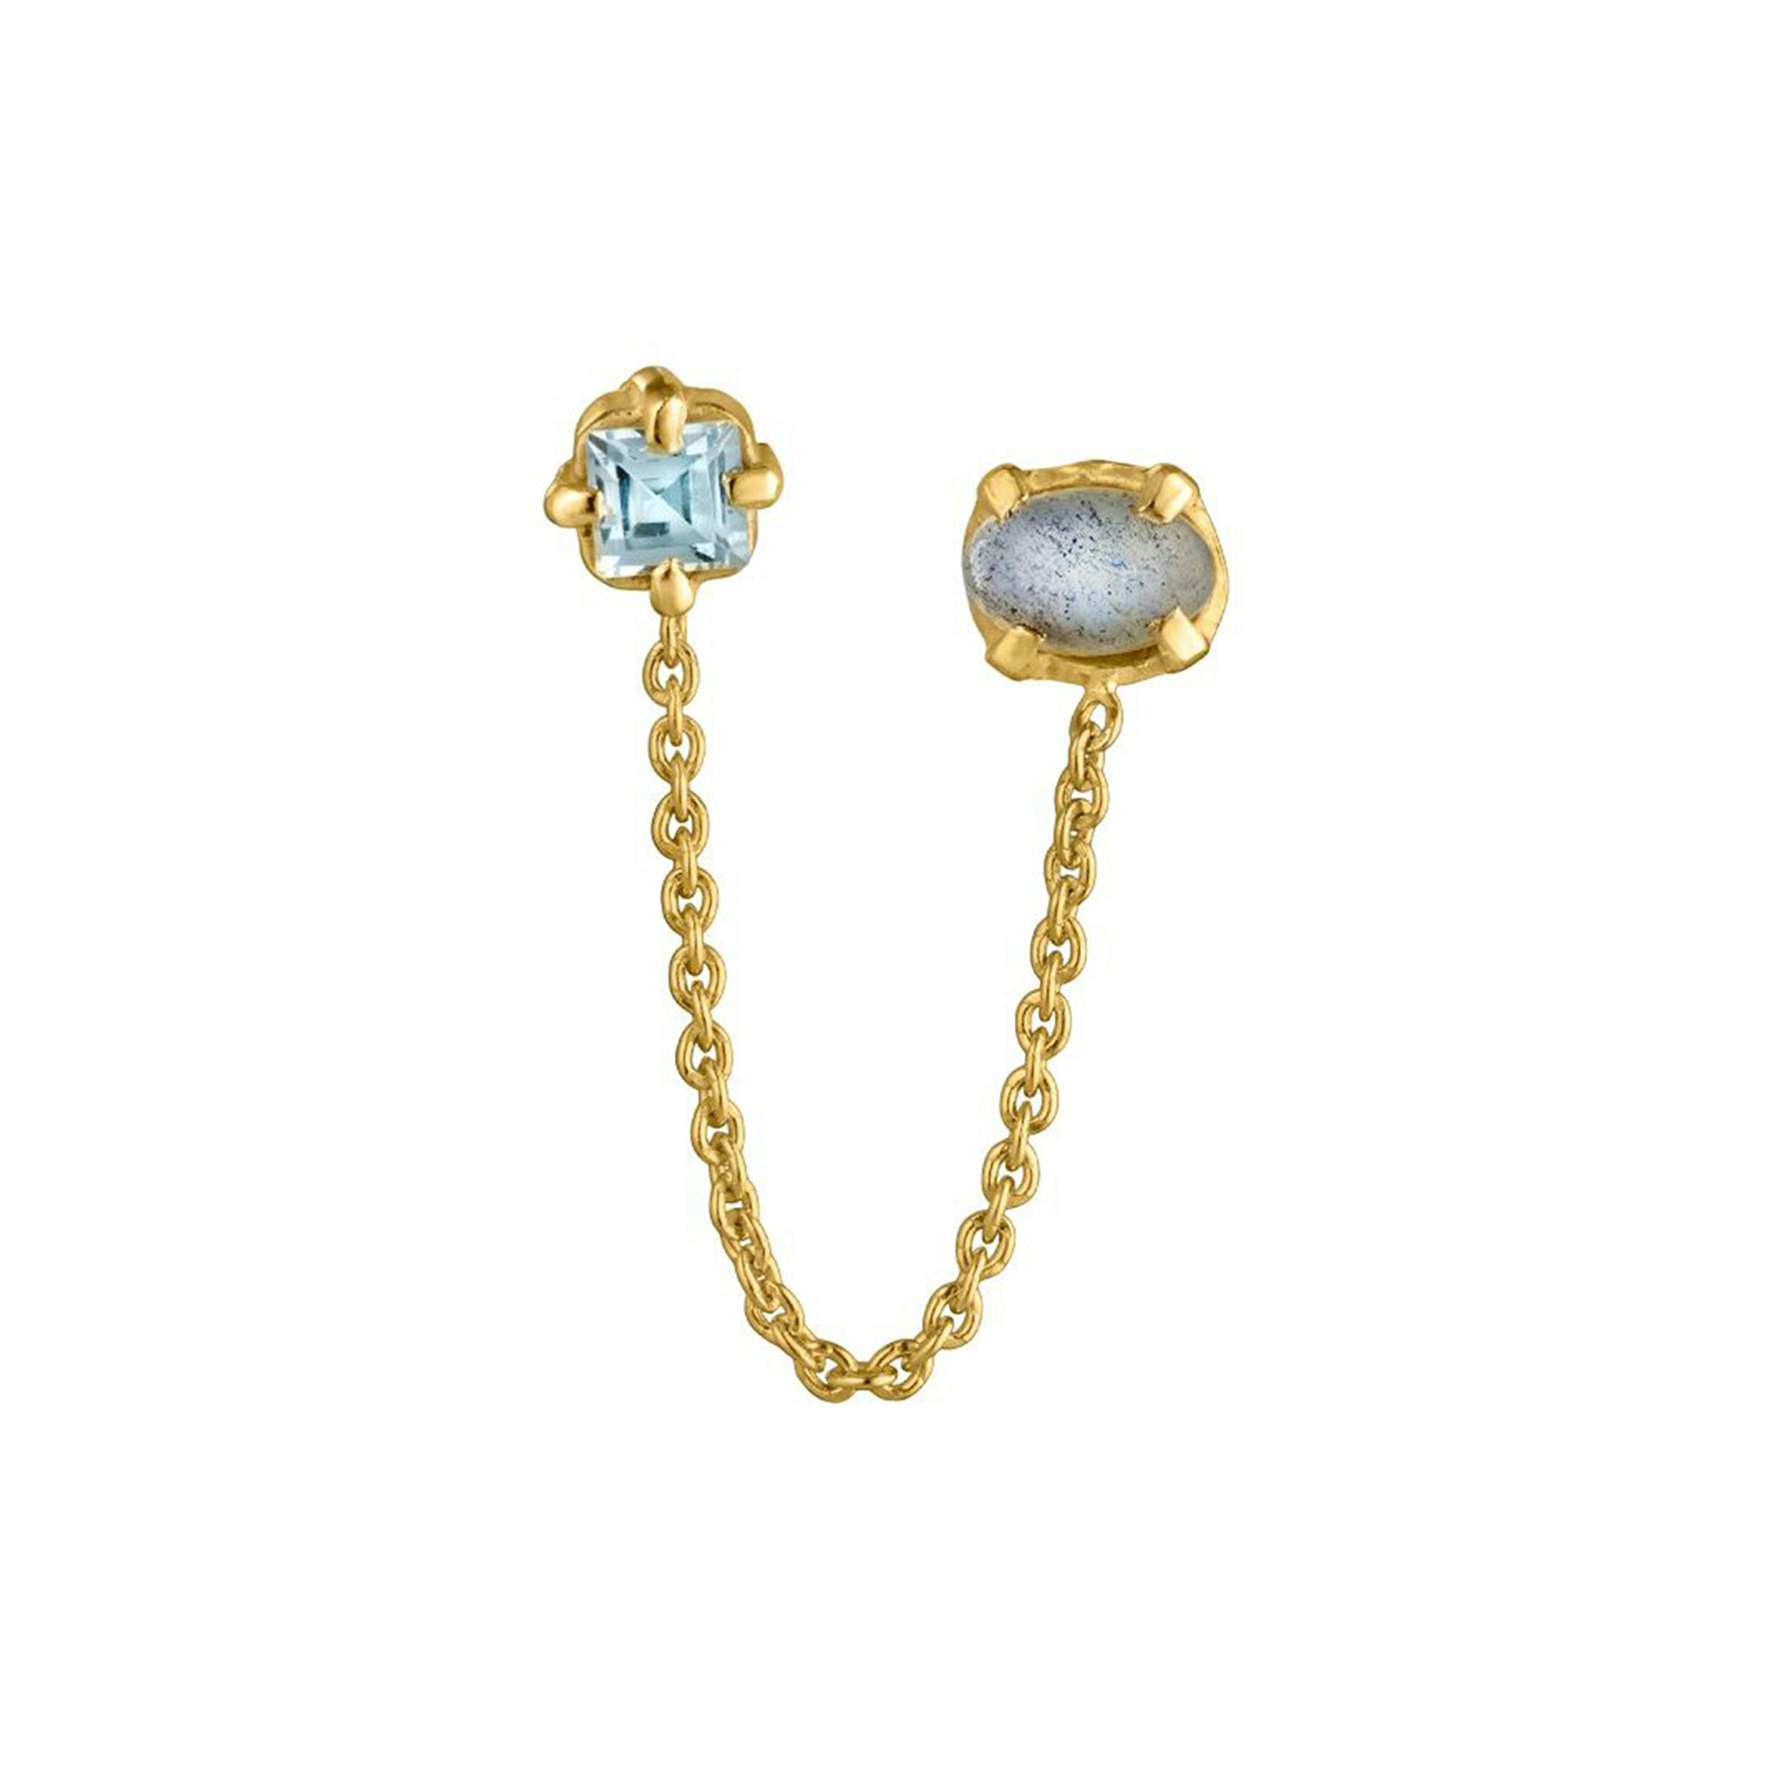 Gem Candy Earchain Aqua from Carré in Goldplated-Silver Sterling 925